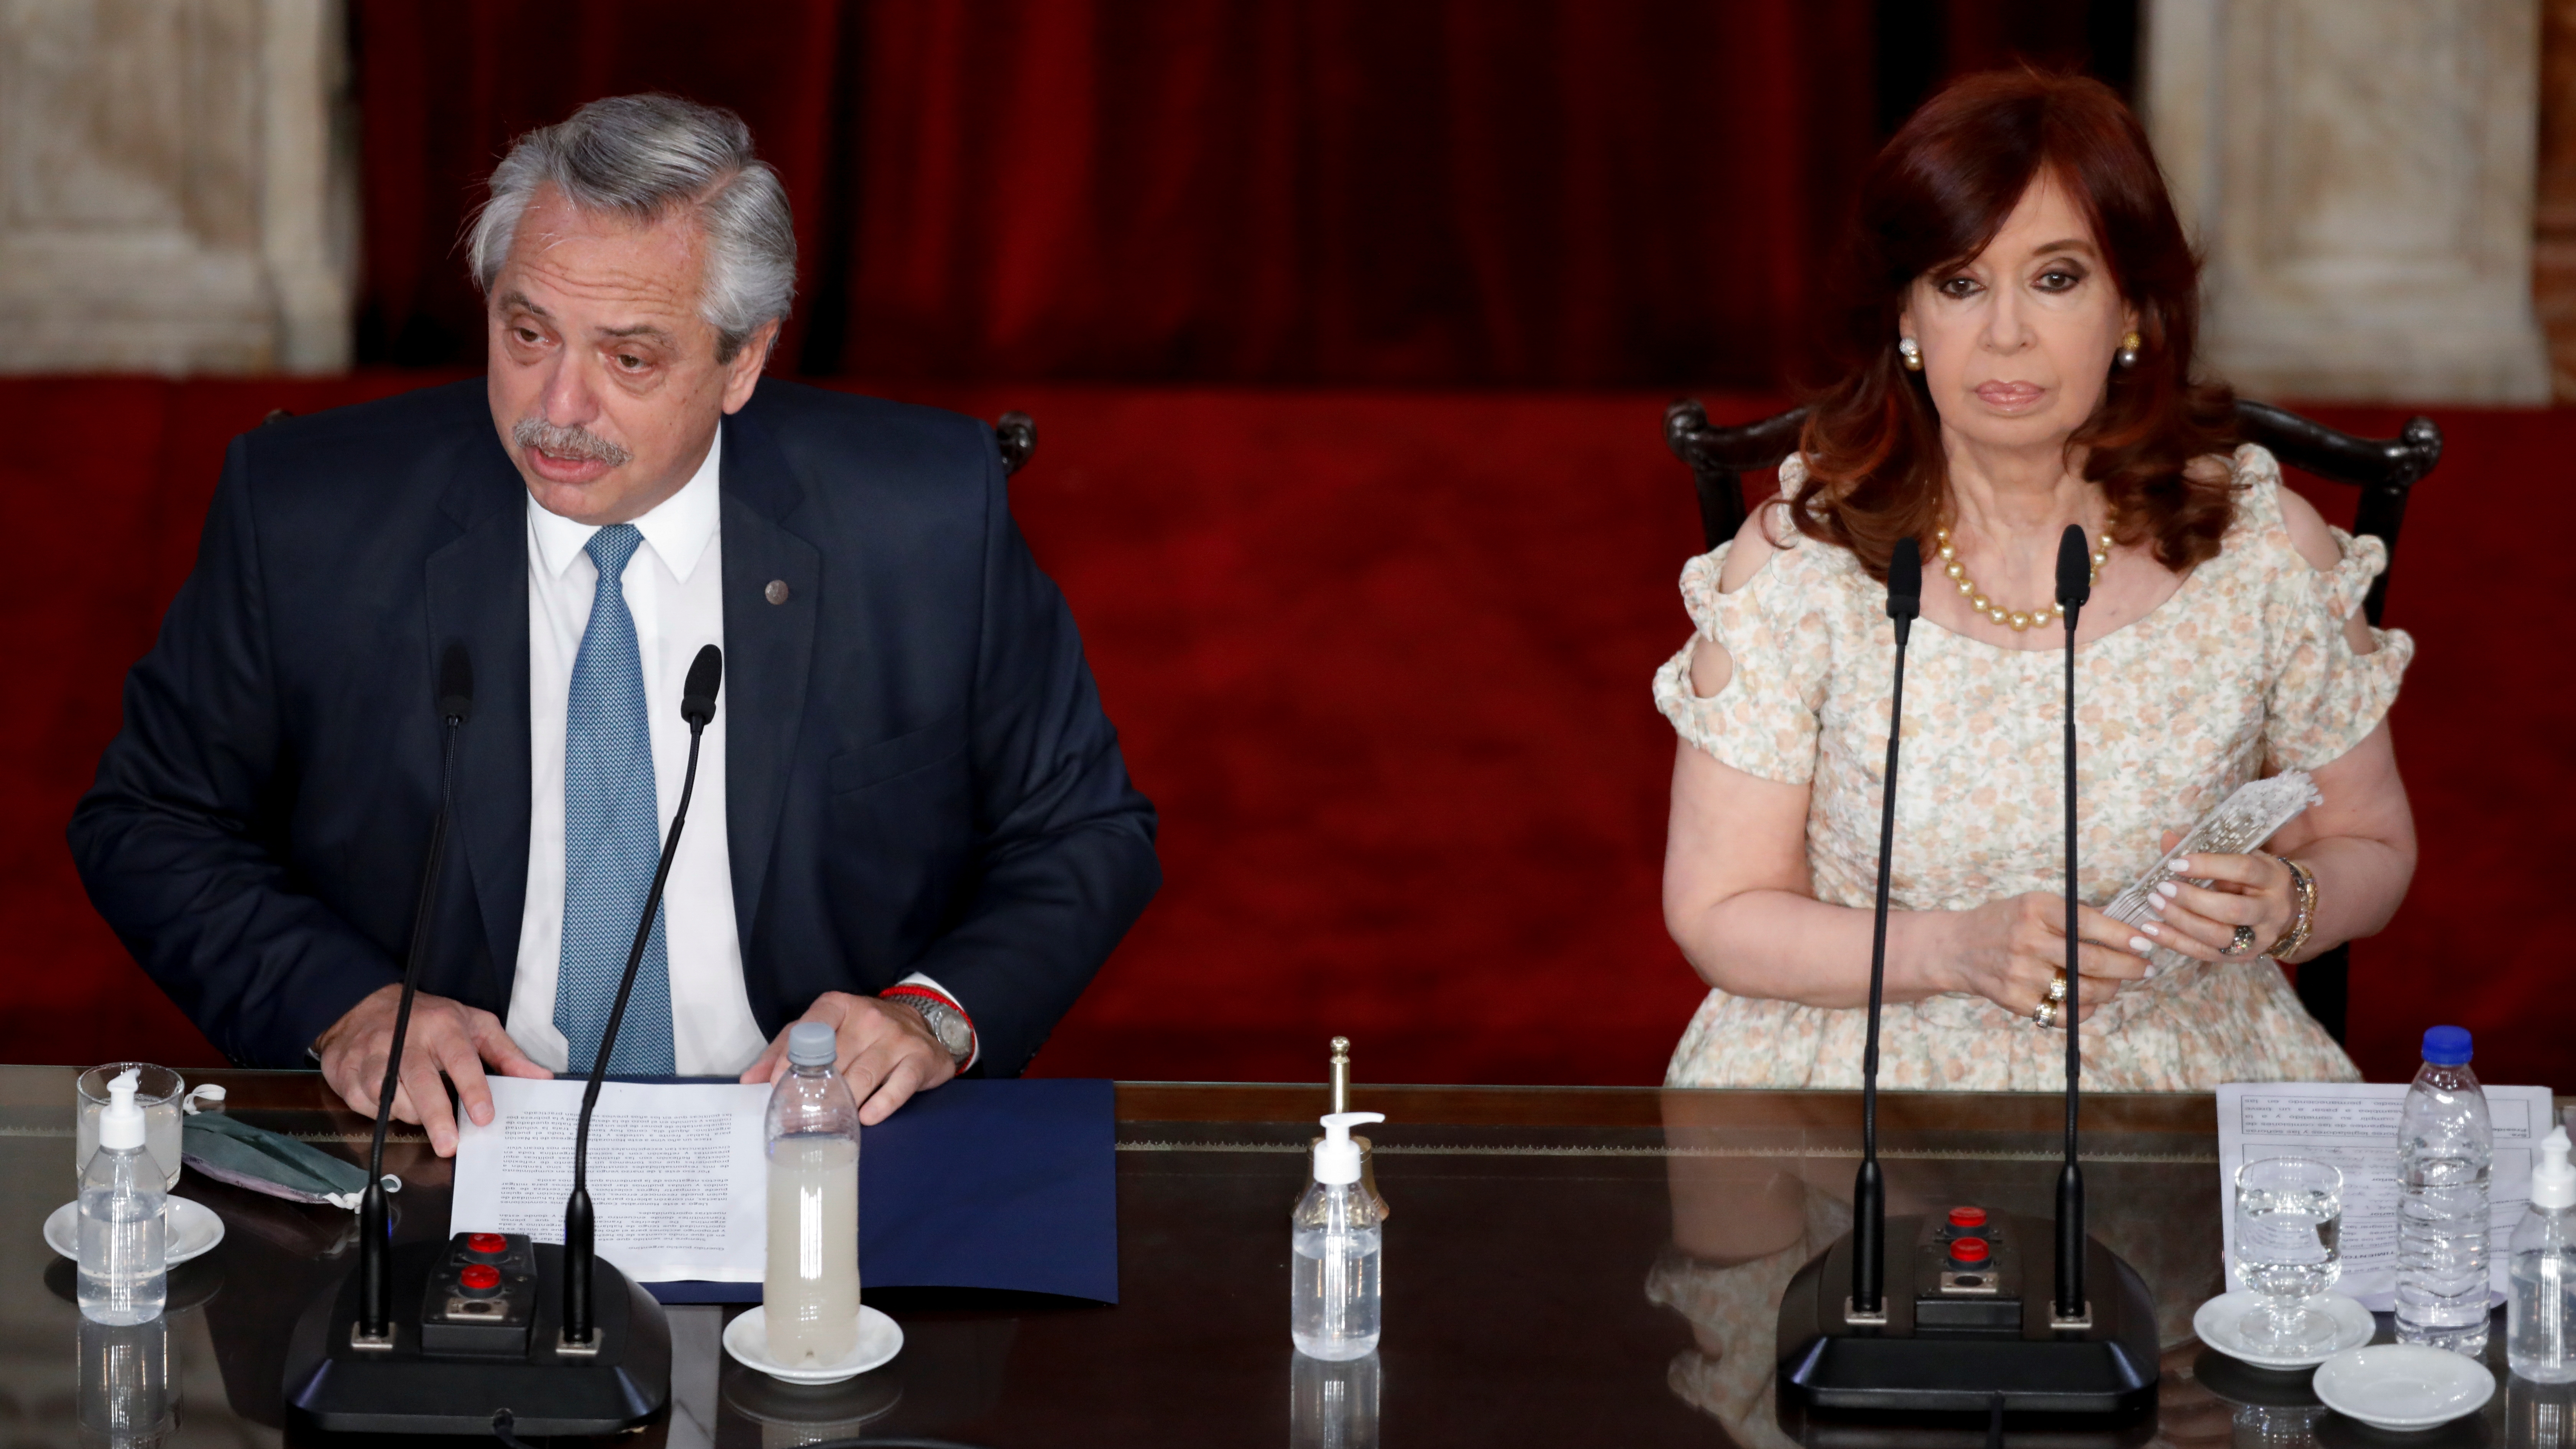 Argentina's President Alberto Fernandez (L) delivers his State of the Nation speech that marks the opening 2021 session of Congress, as vice-President Cristina Fernandez de Kirchner looks on in Buenos Aires, Argentina March 1, 2021. Natacha Pisarenko/Pool via REUTERS